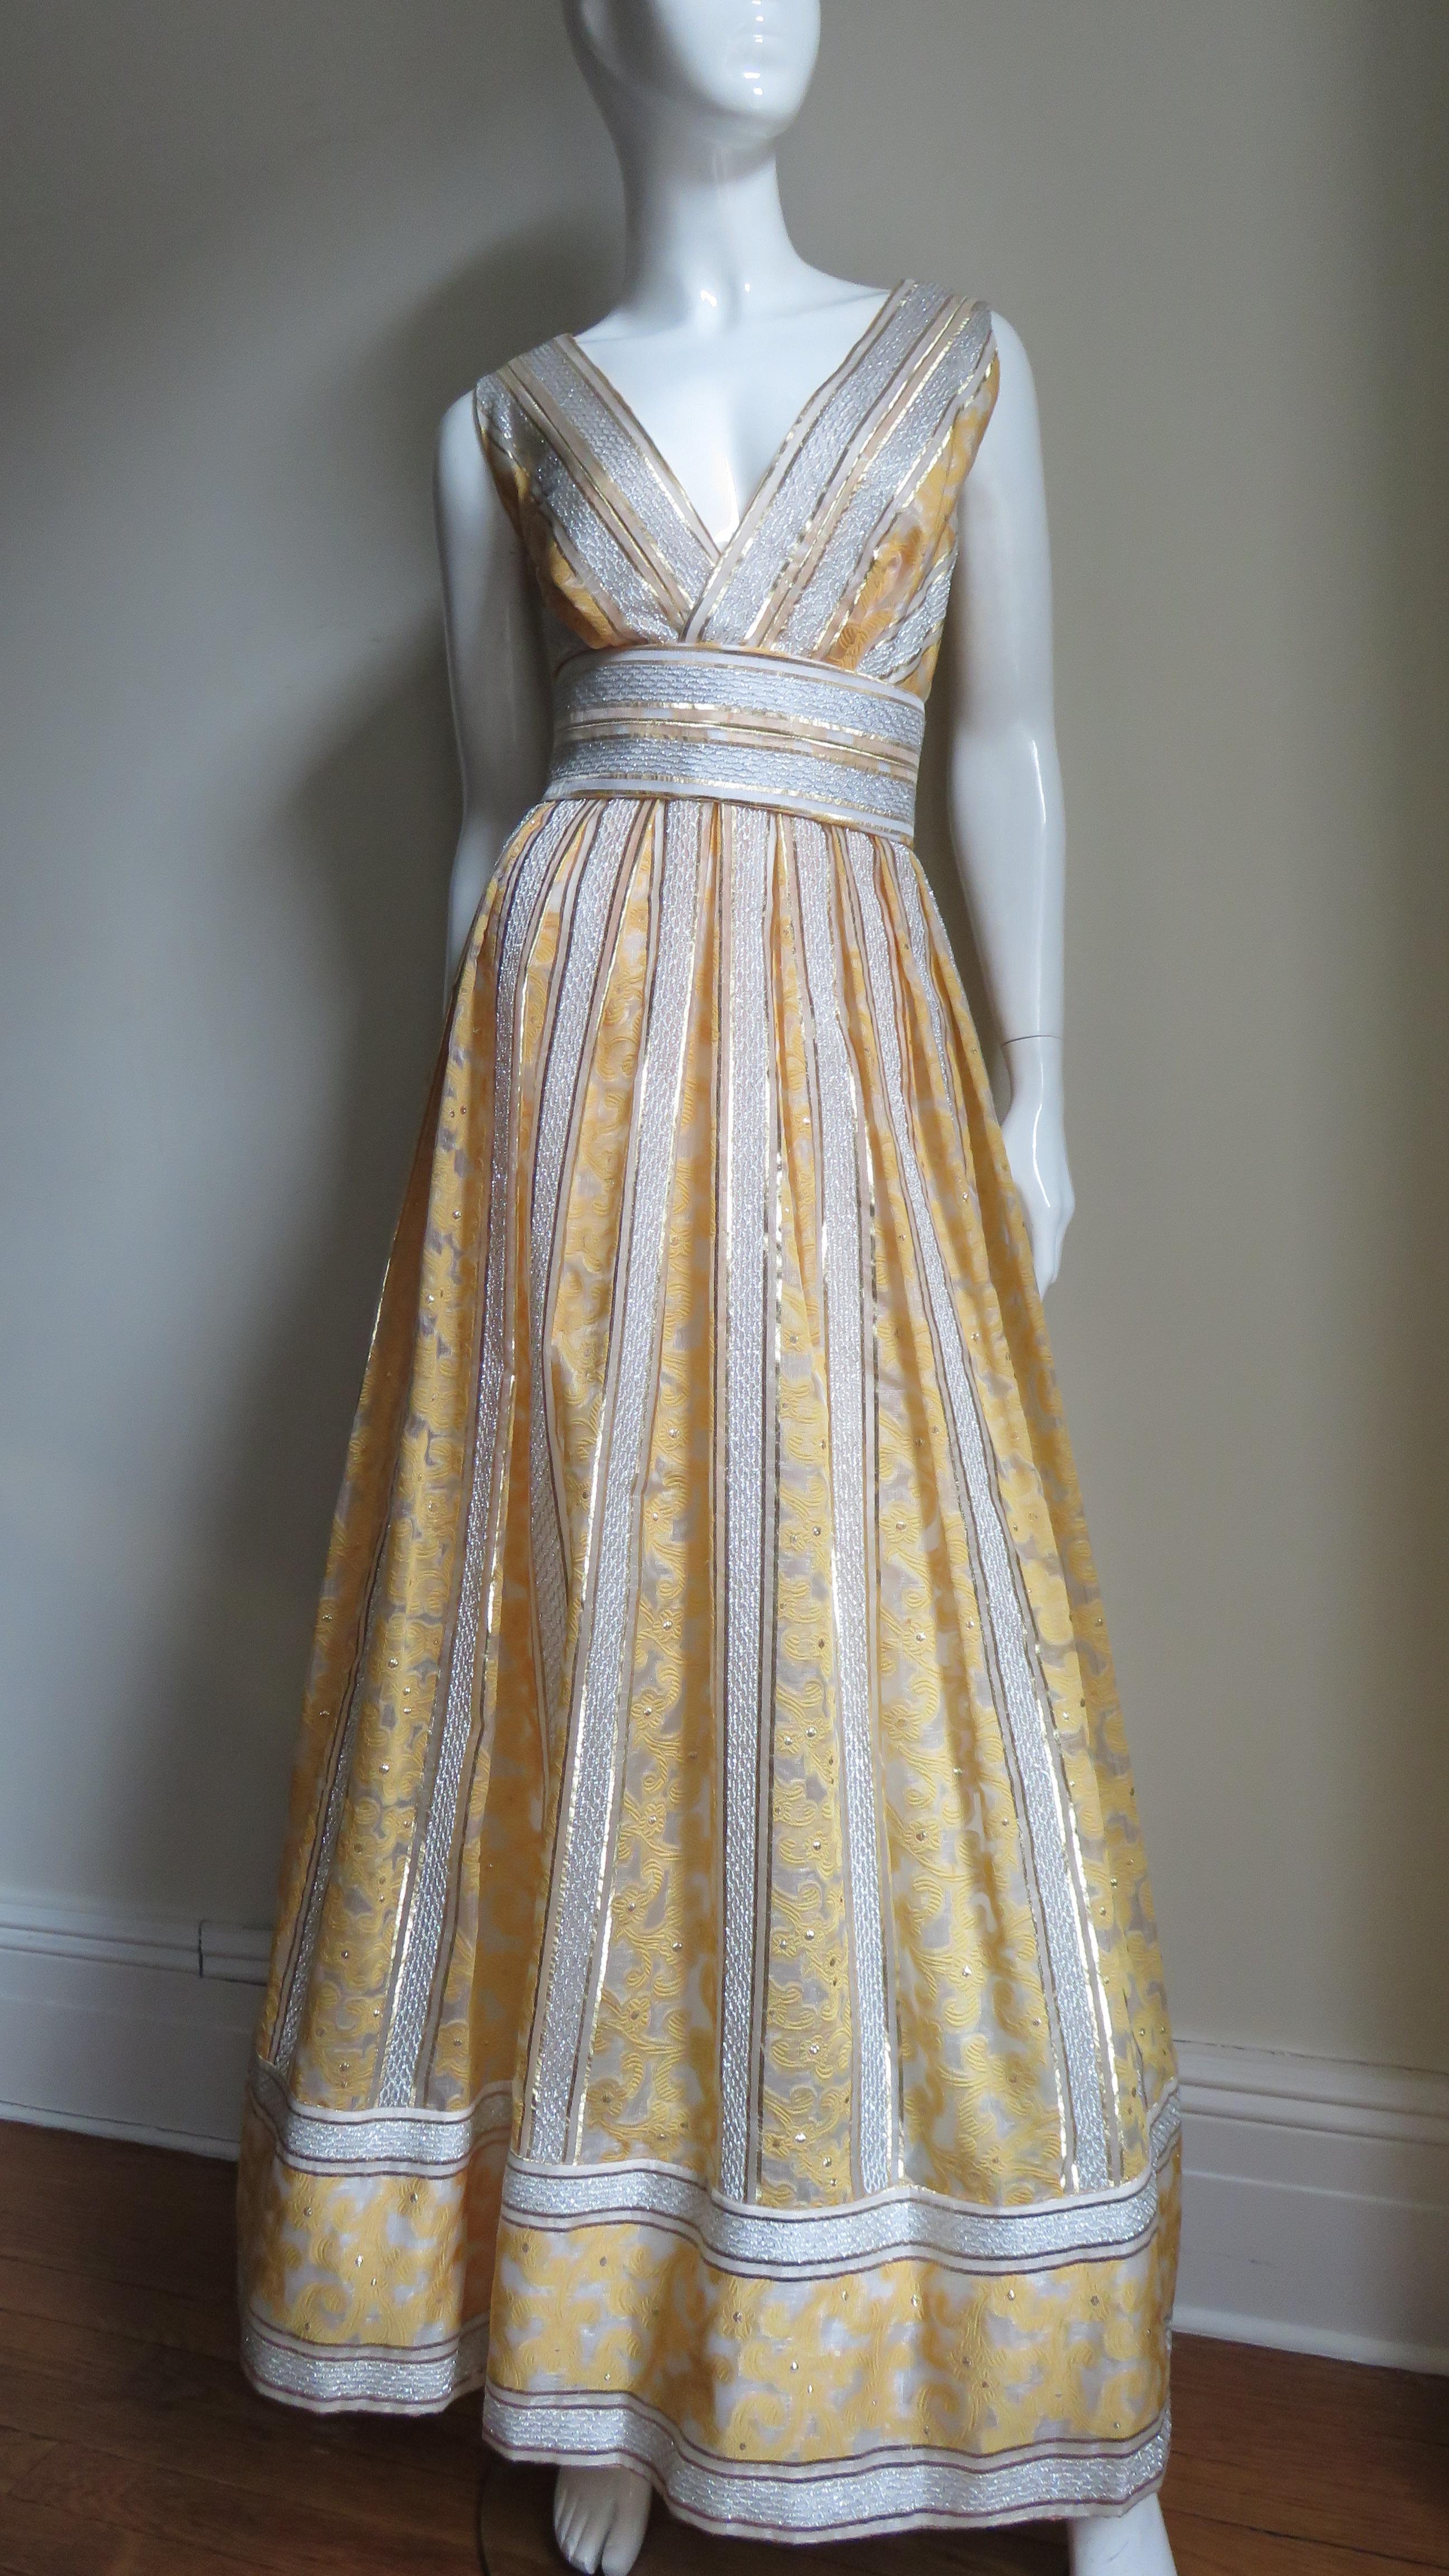 A beautiful silk gown from Kent Originals made in British Hong Kong known for beautiful detailed works.  The fabric consists of a golden scroll pattern and silver thread shot geometric pattern both against a sheer off white background with